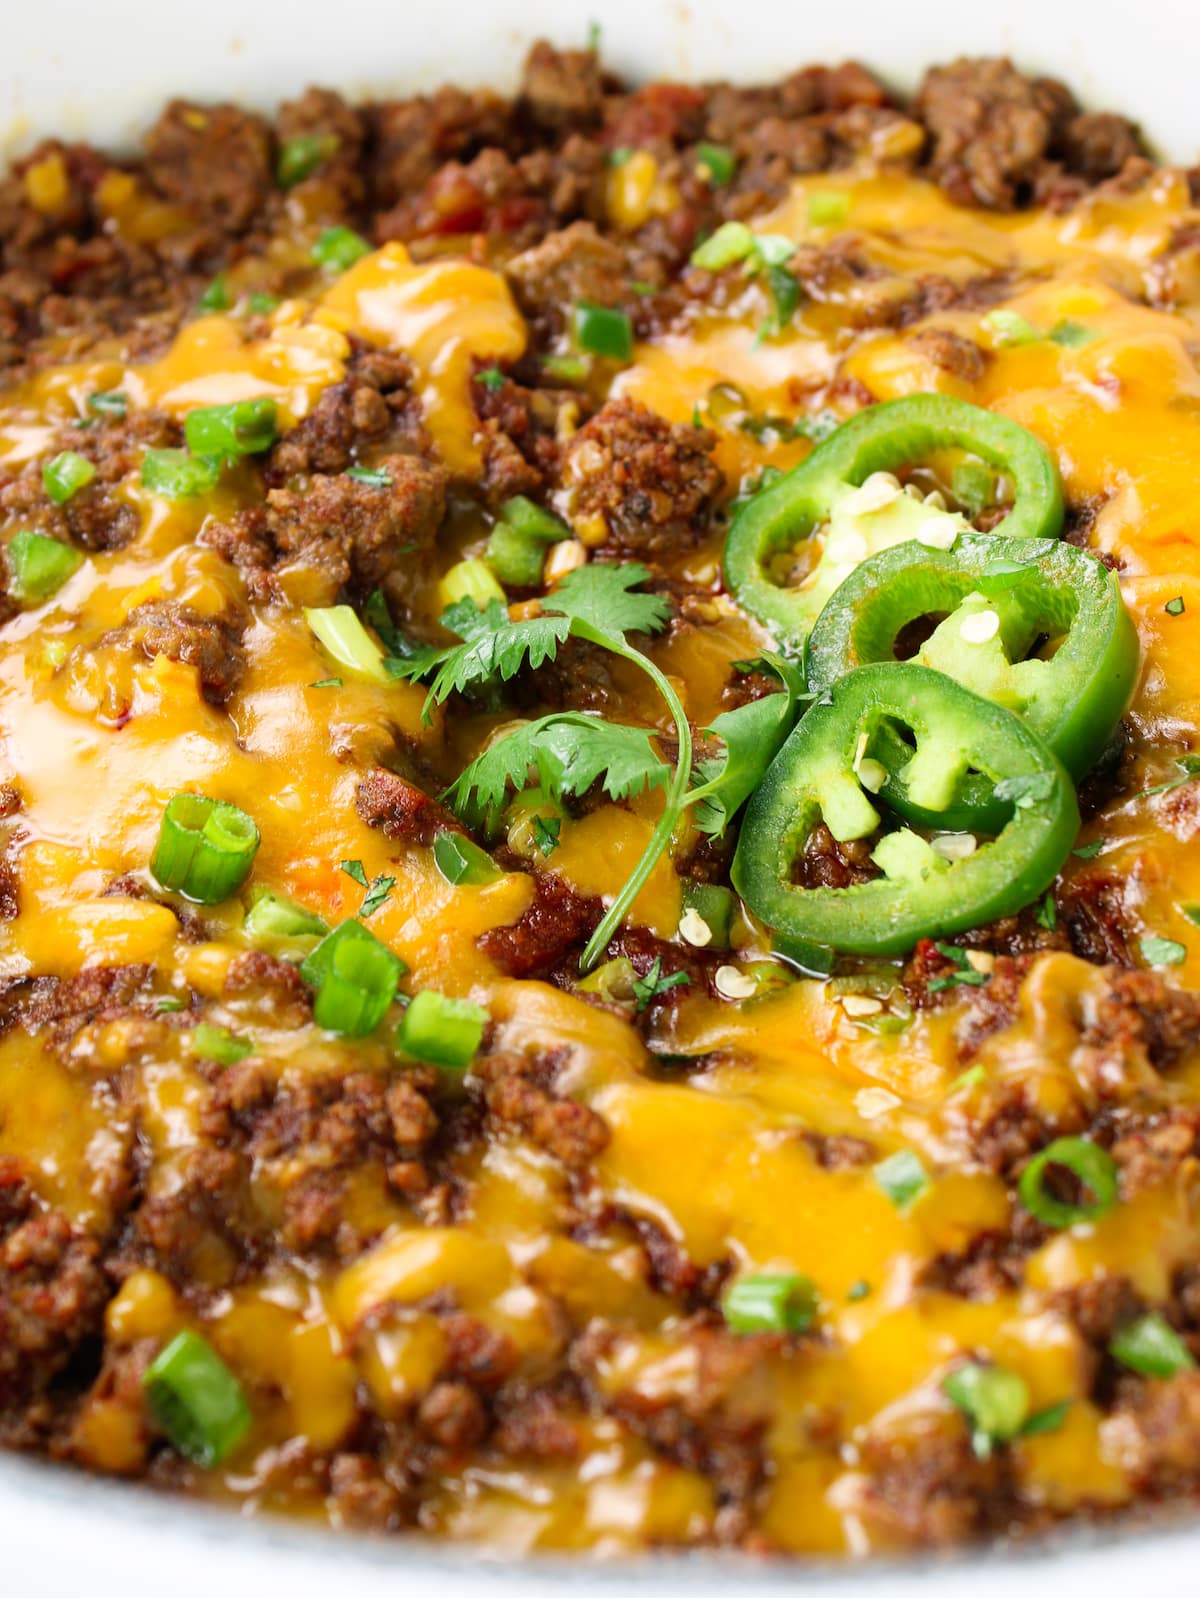 Close-up photo of chili with cheese melted on top.